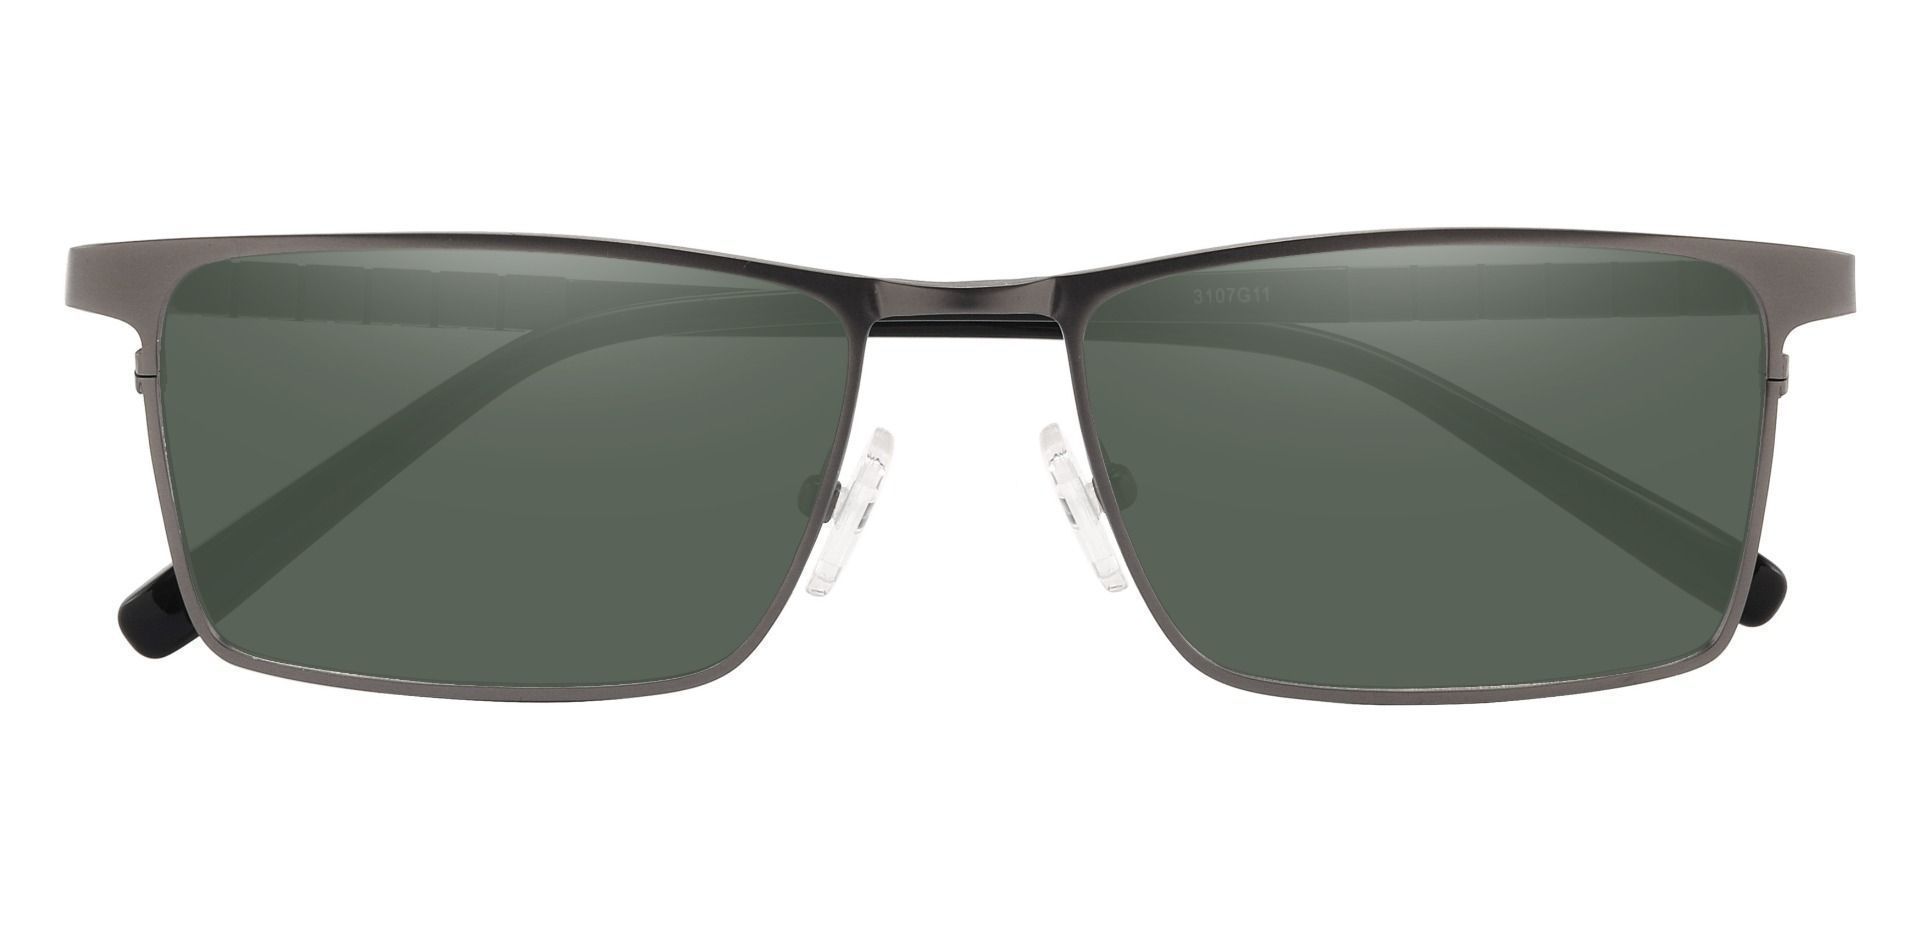 Cheshire Rectangle Non-Rx Sunglasses - Gray Frame With Green Lenses